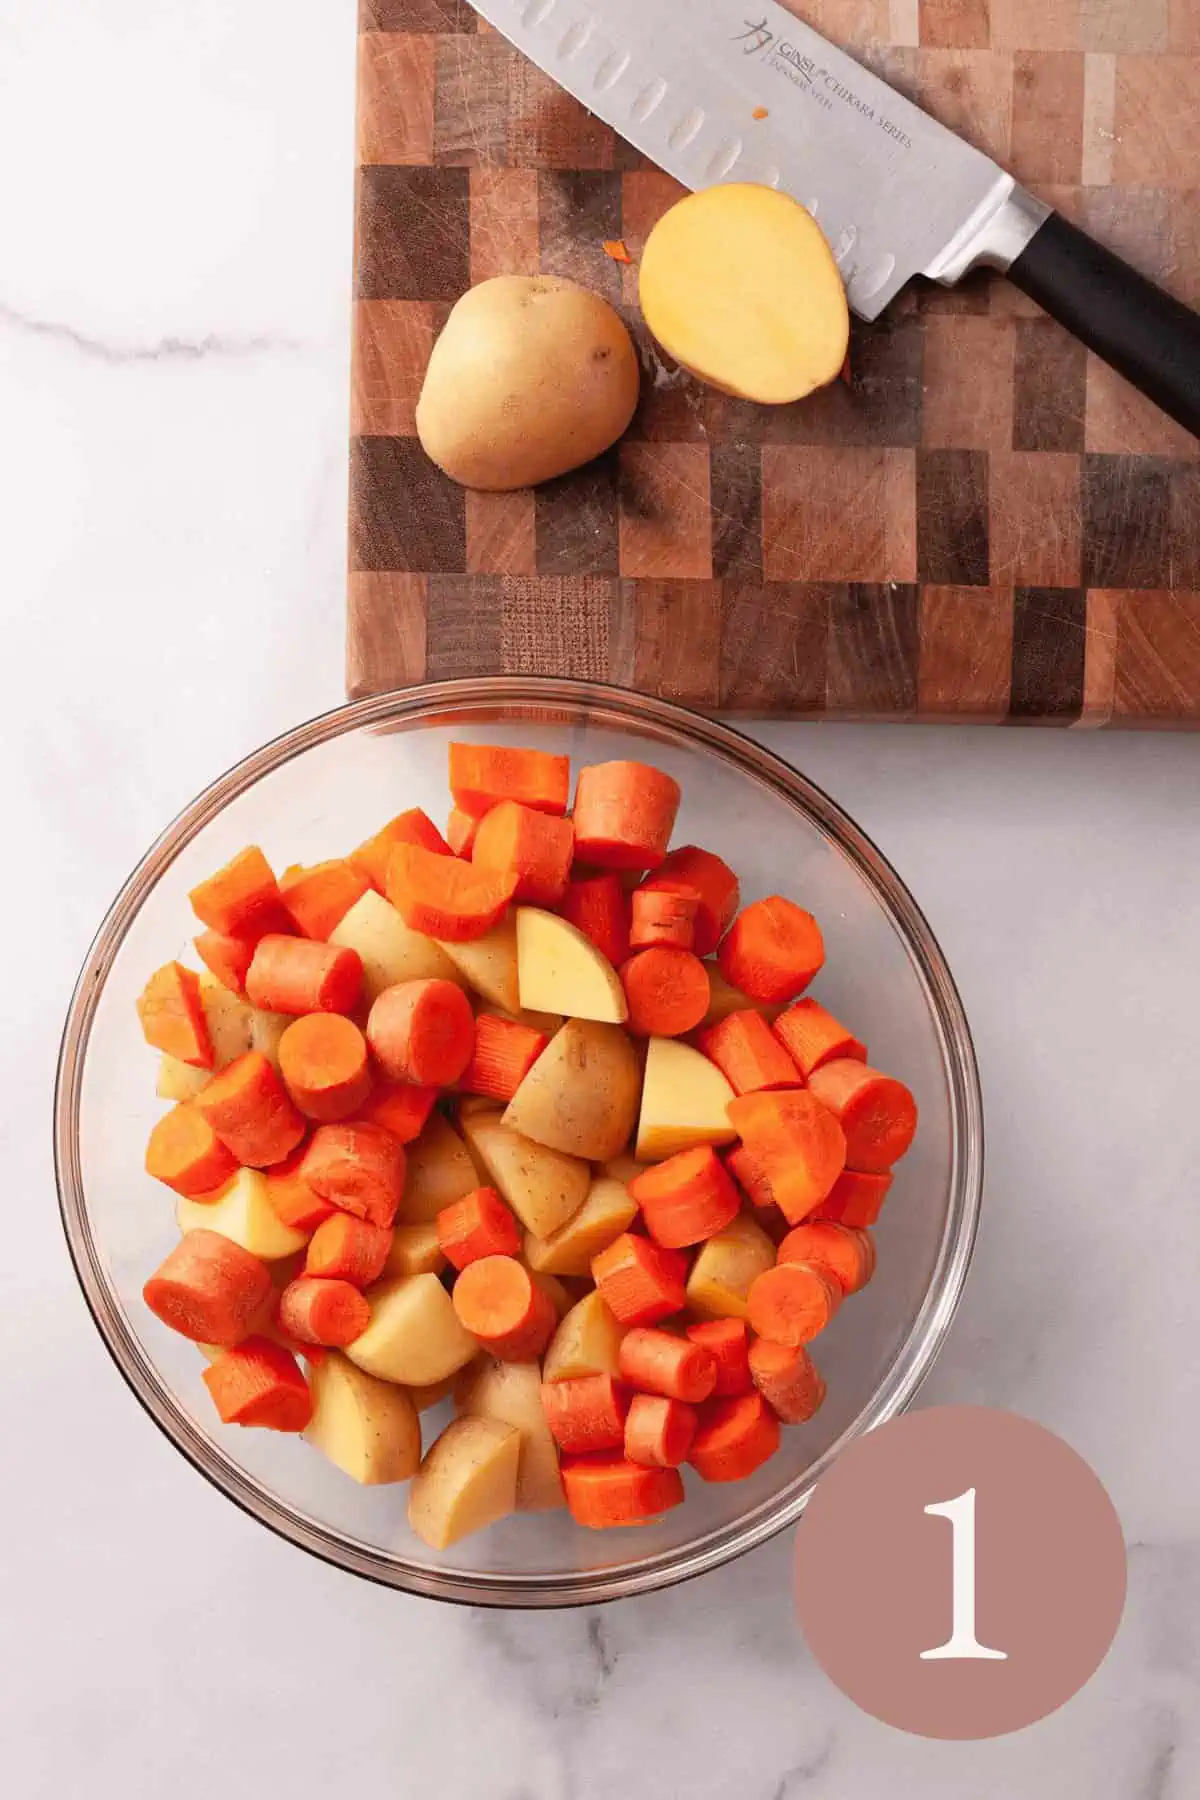 Overhead image of chopped potatoes and carrots in clear bowl and cutting board